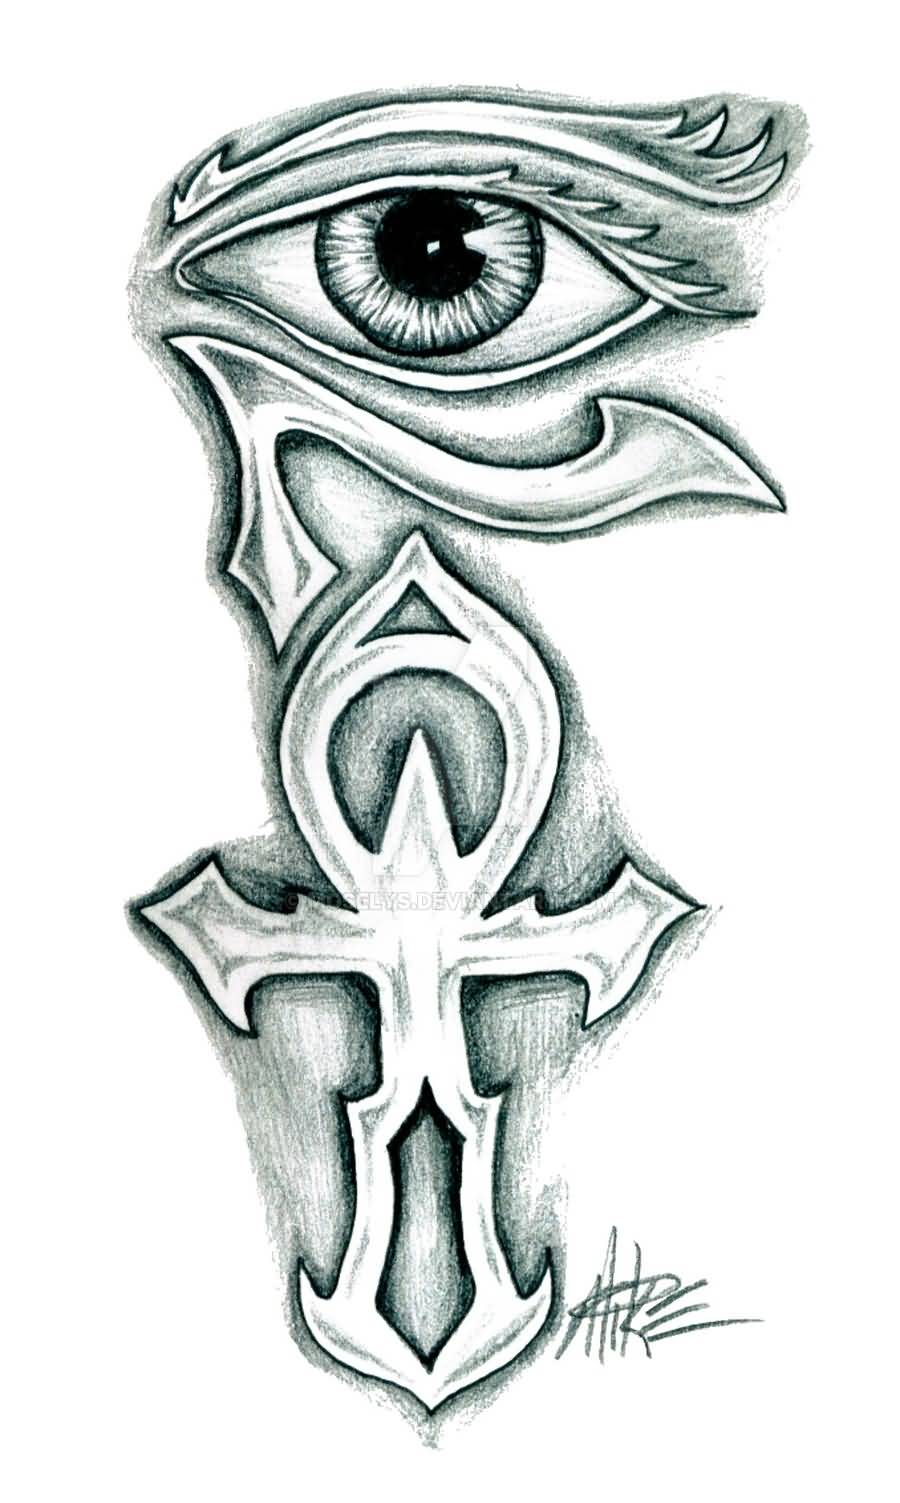 Grey Ink Horus Eye With Ankh Tattoo Design By Moselys